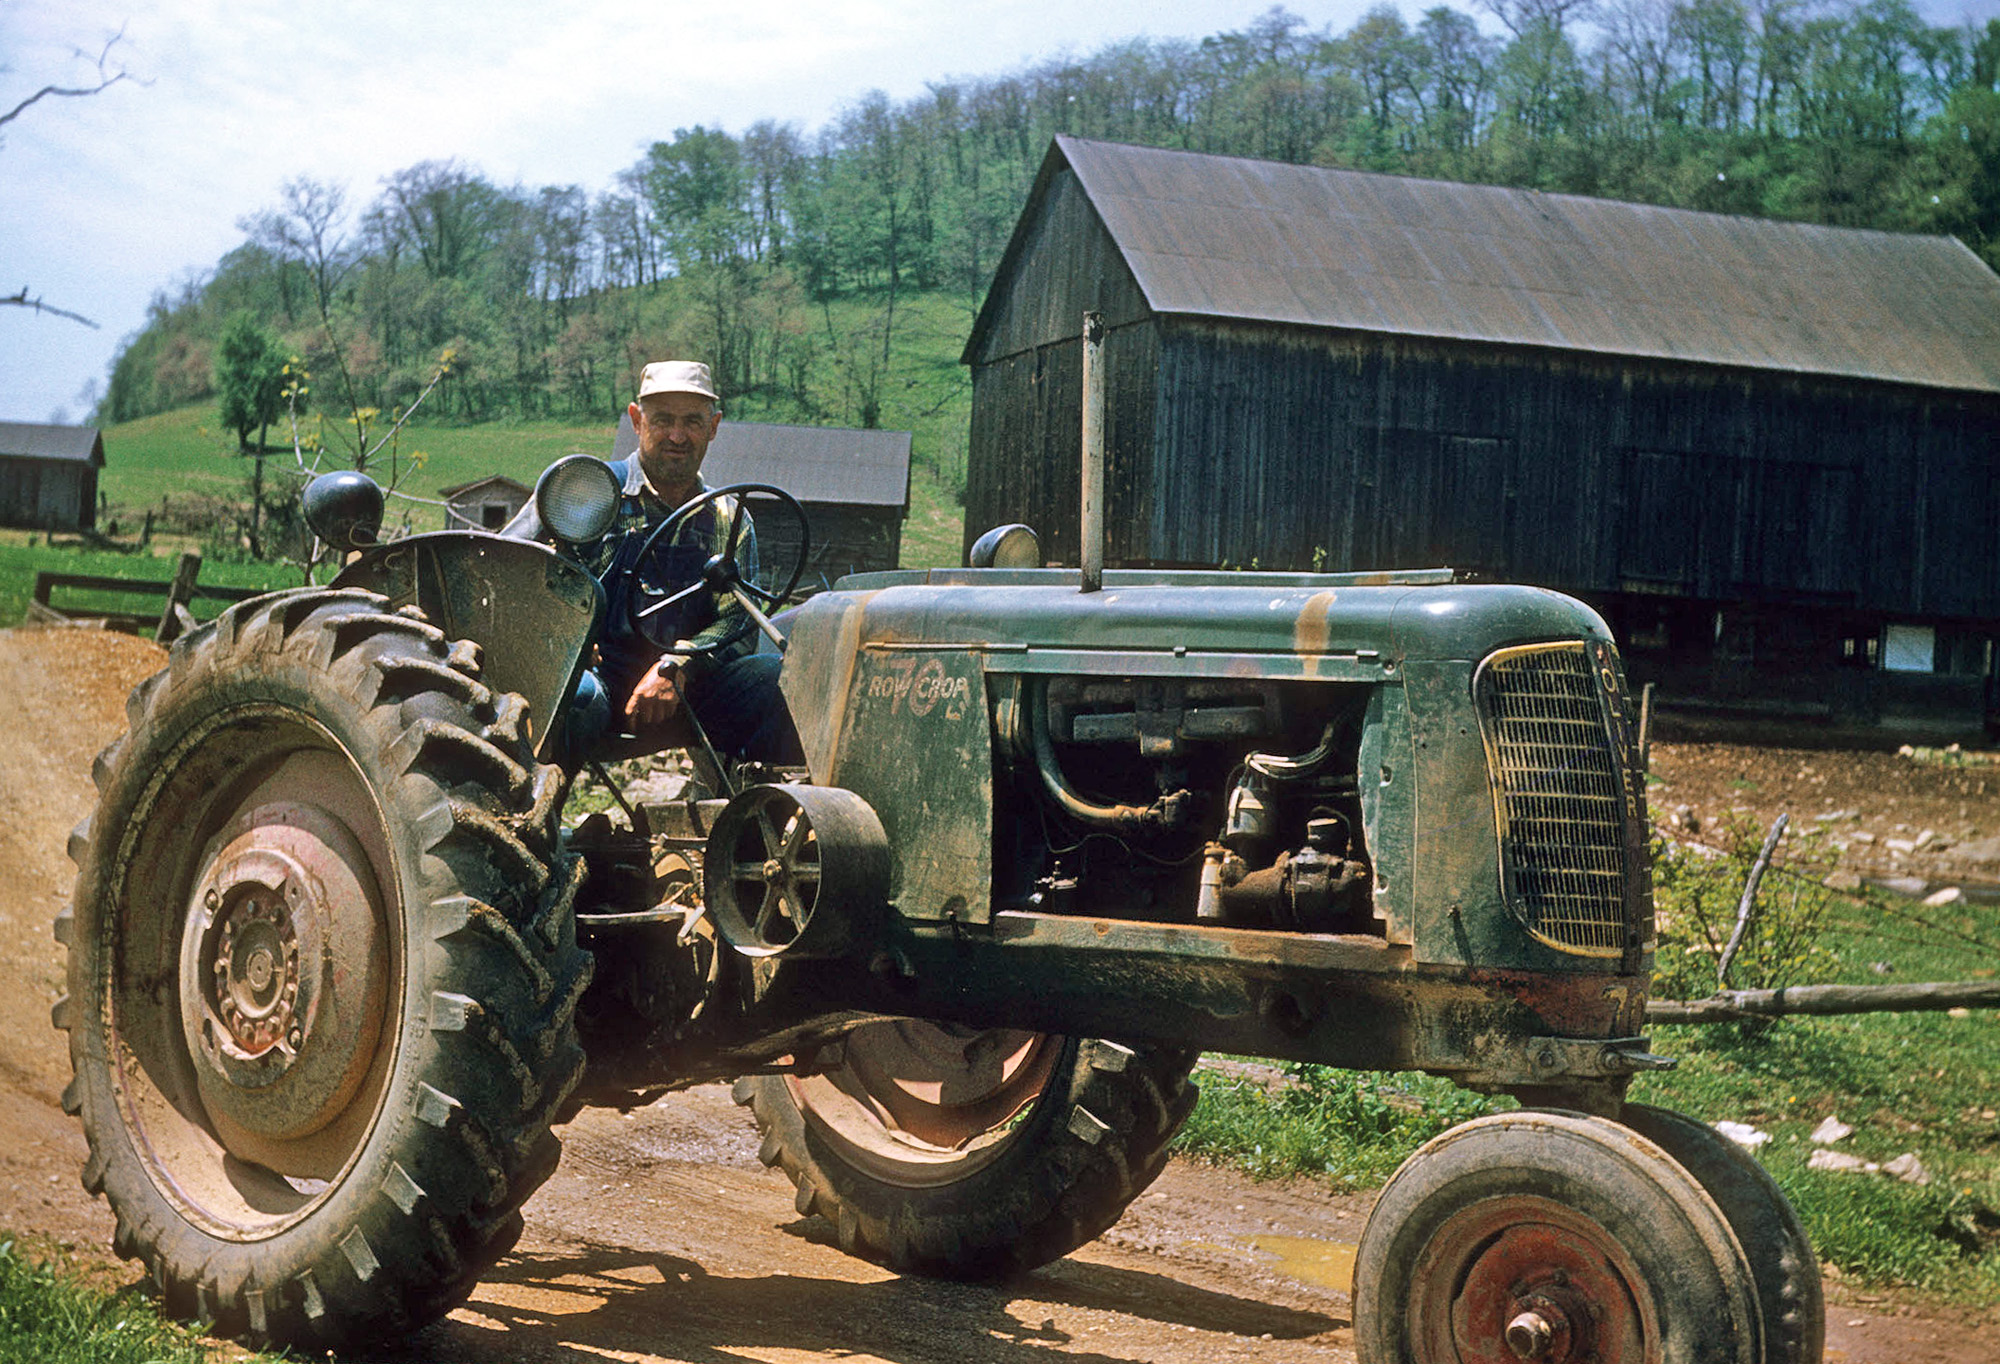 A farmer known to my family (but, sadly, not to me) smiles at the photographer - presumably my grandfather - in this early-1950s shot from Honey Grove, Pennsylvania. View full size.